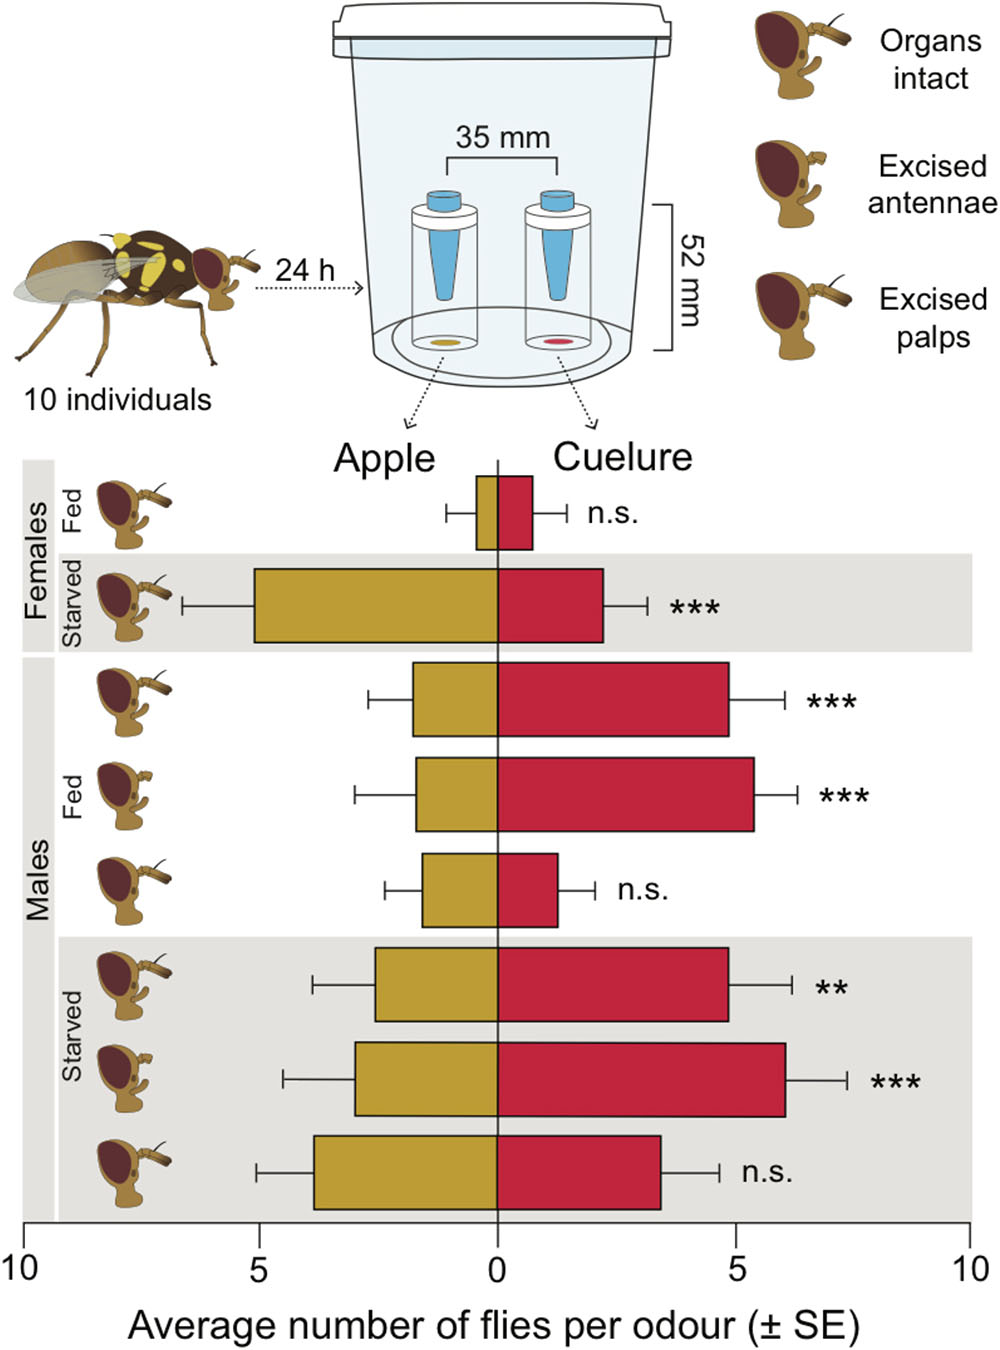 PDF) Evaluation of lures and traps for male and female monitoring of  Mediterranean fruit fly in pome and stone fruit